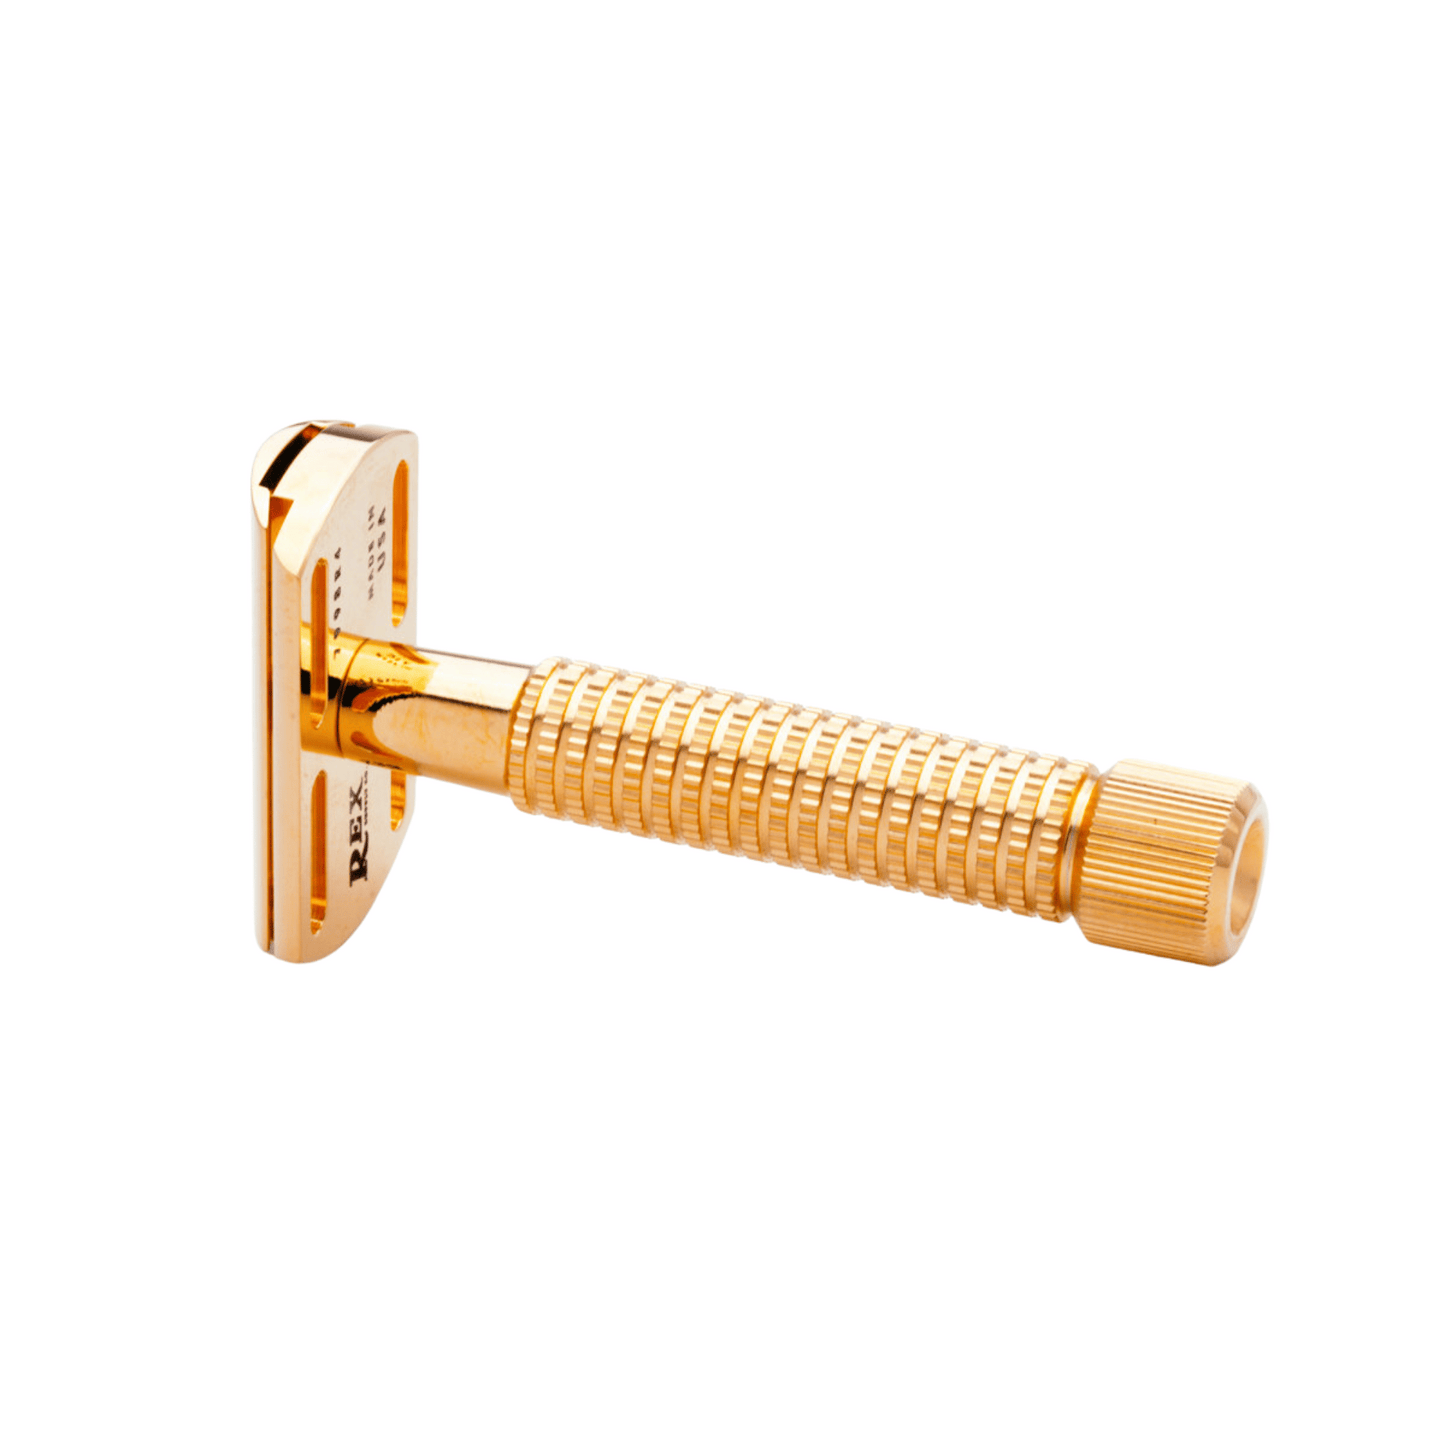 Primary Image of  Envoy Deluxe Gold Safety Razor